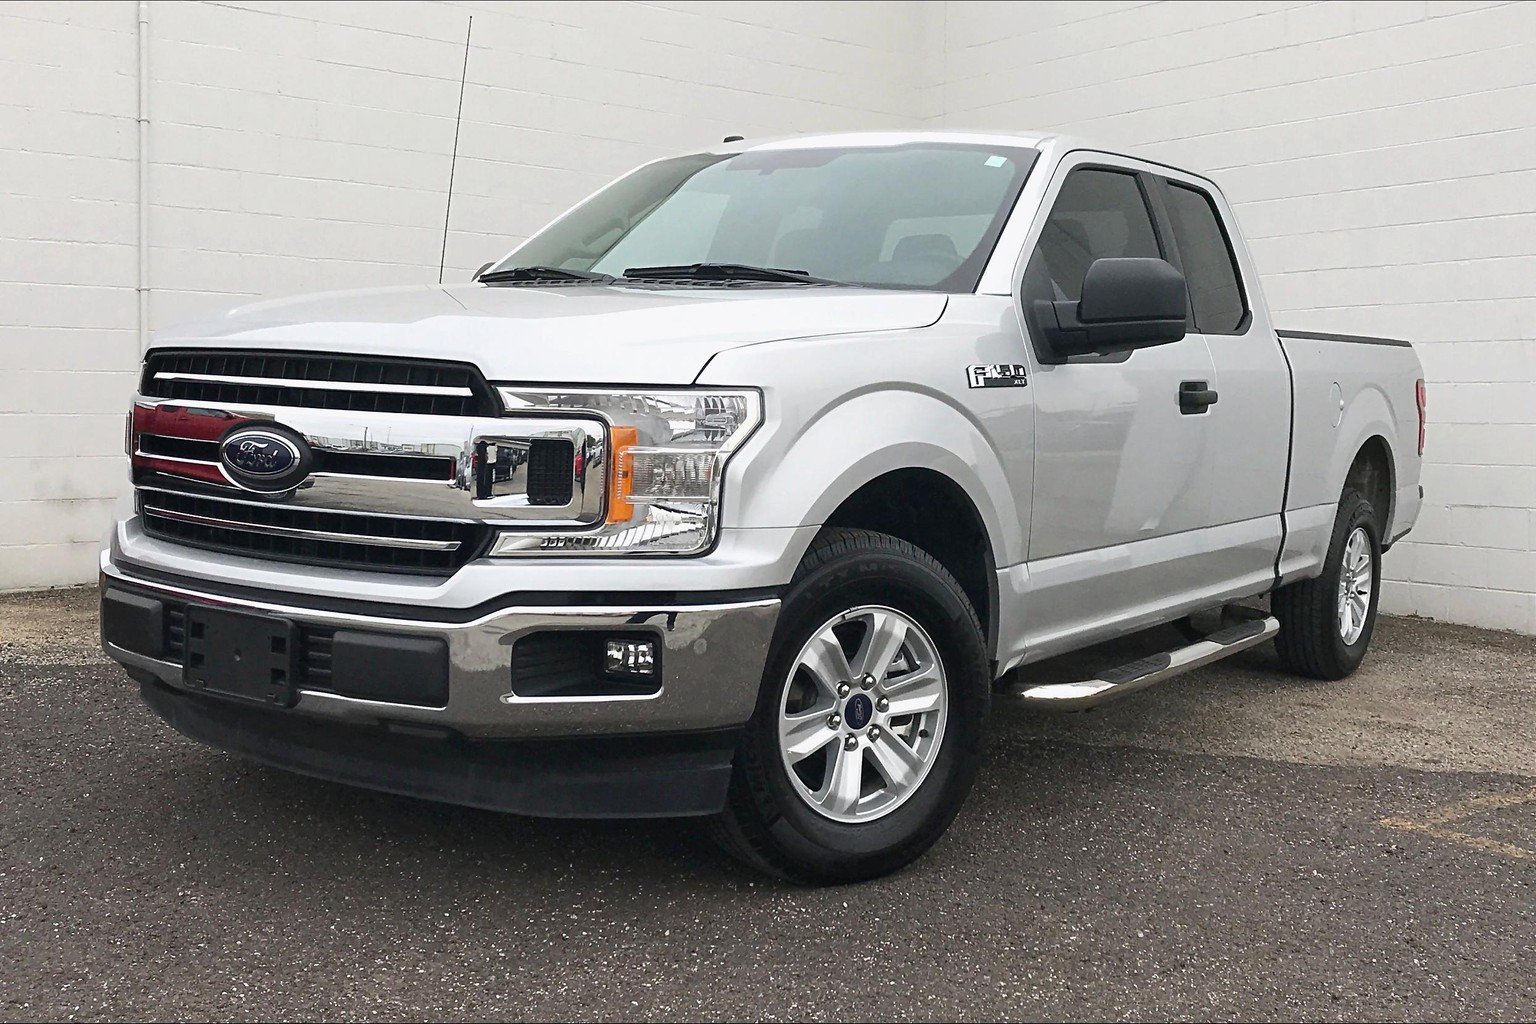 Pre-Owned 2018 Ford F-150 XLT Extended Cab Pickup in Morton #G10055